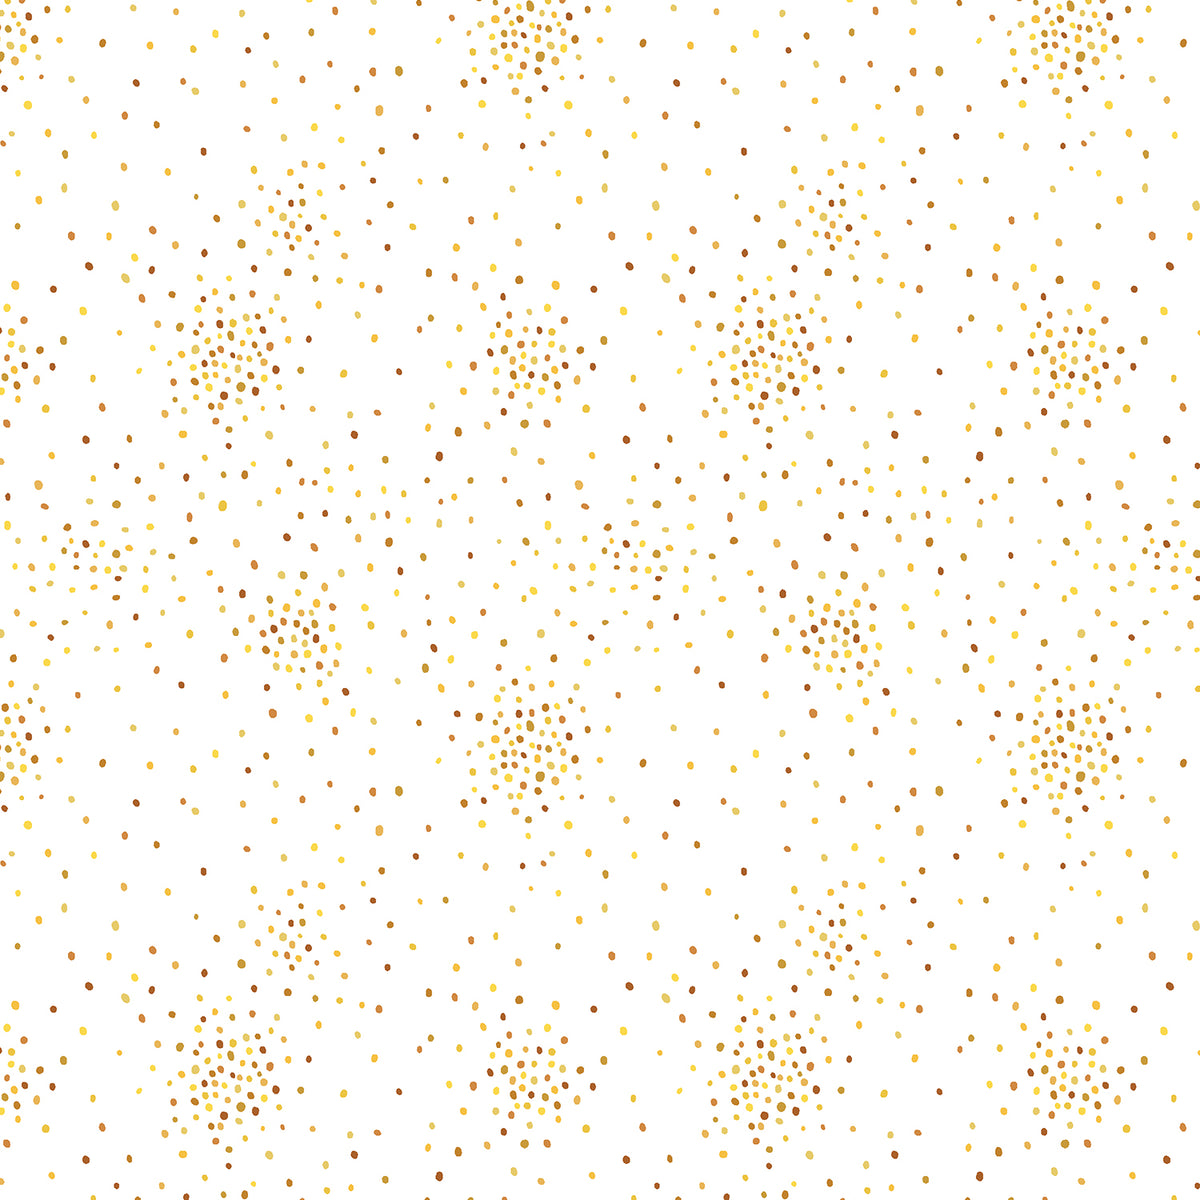 Miniature Minis Dapple Dots Quilt Fabric - Dots in Yellow/White - RJ1705-YW6